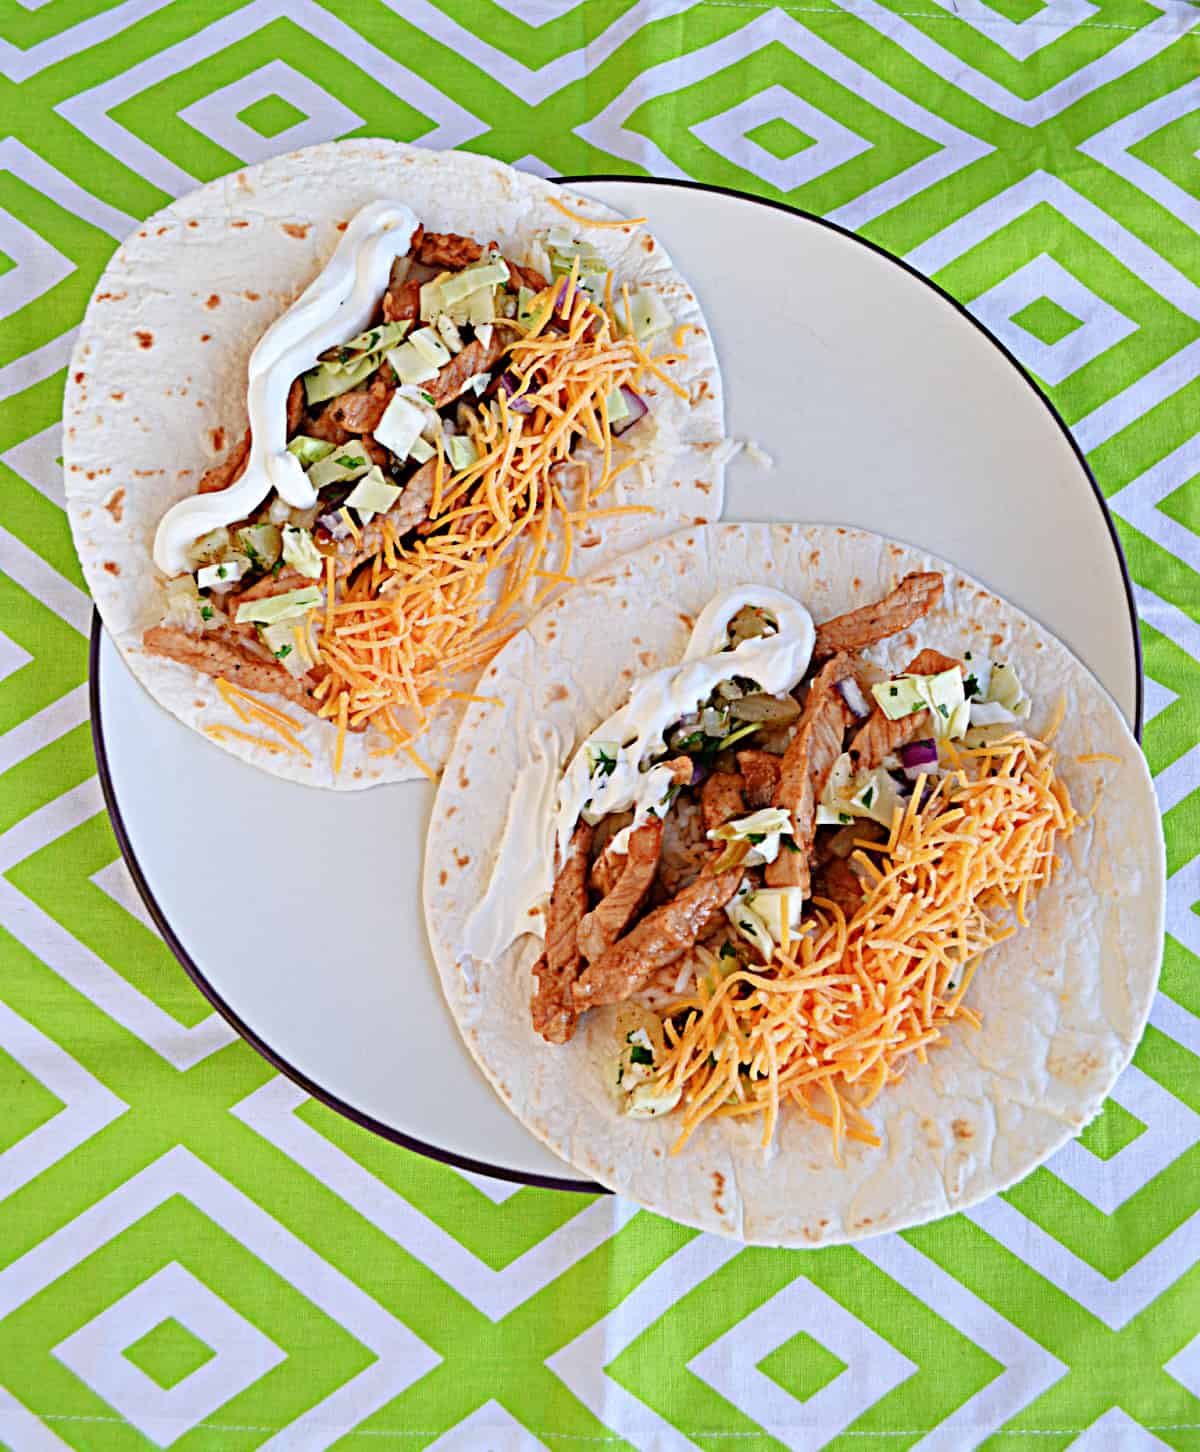 Two pork soft tacos on a plate.